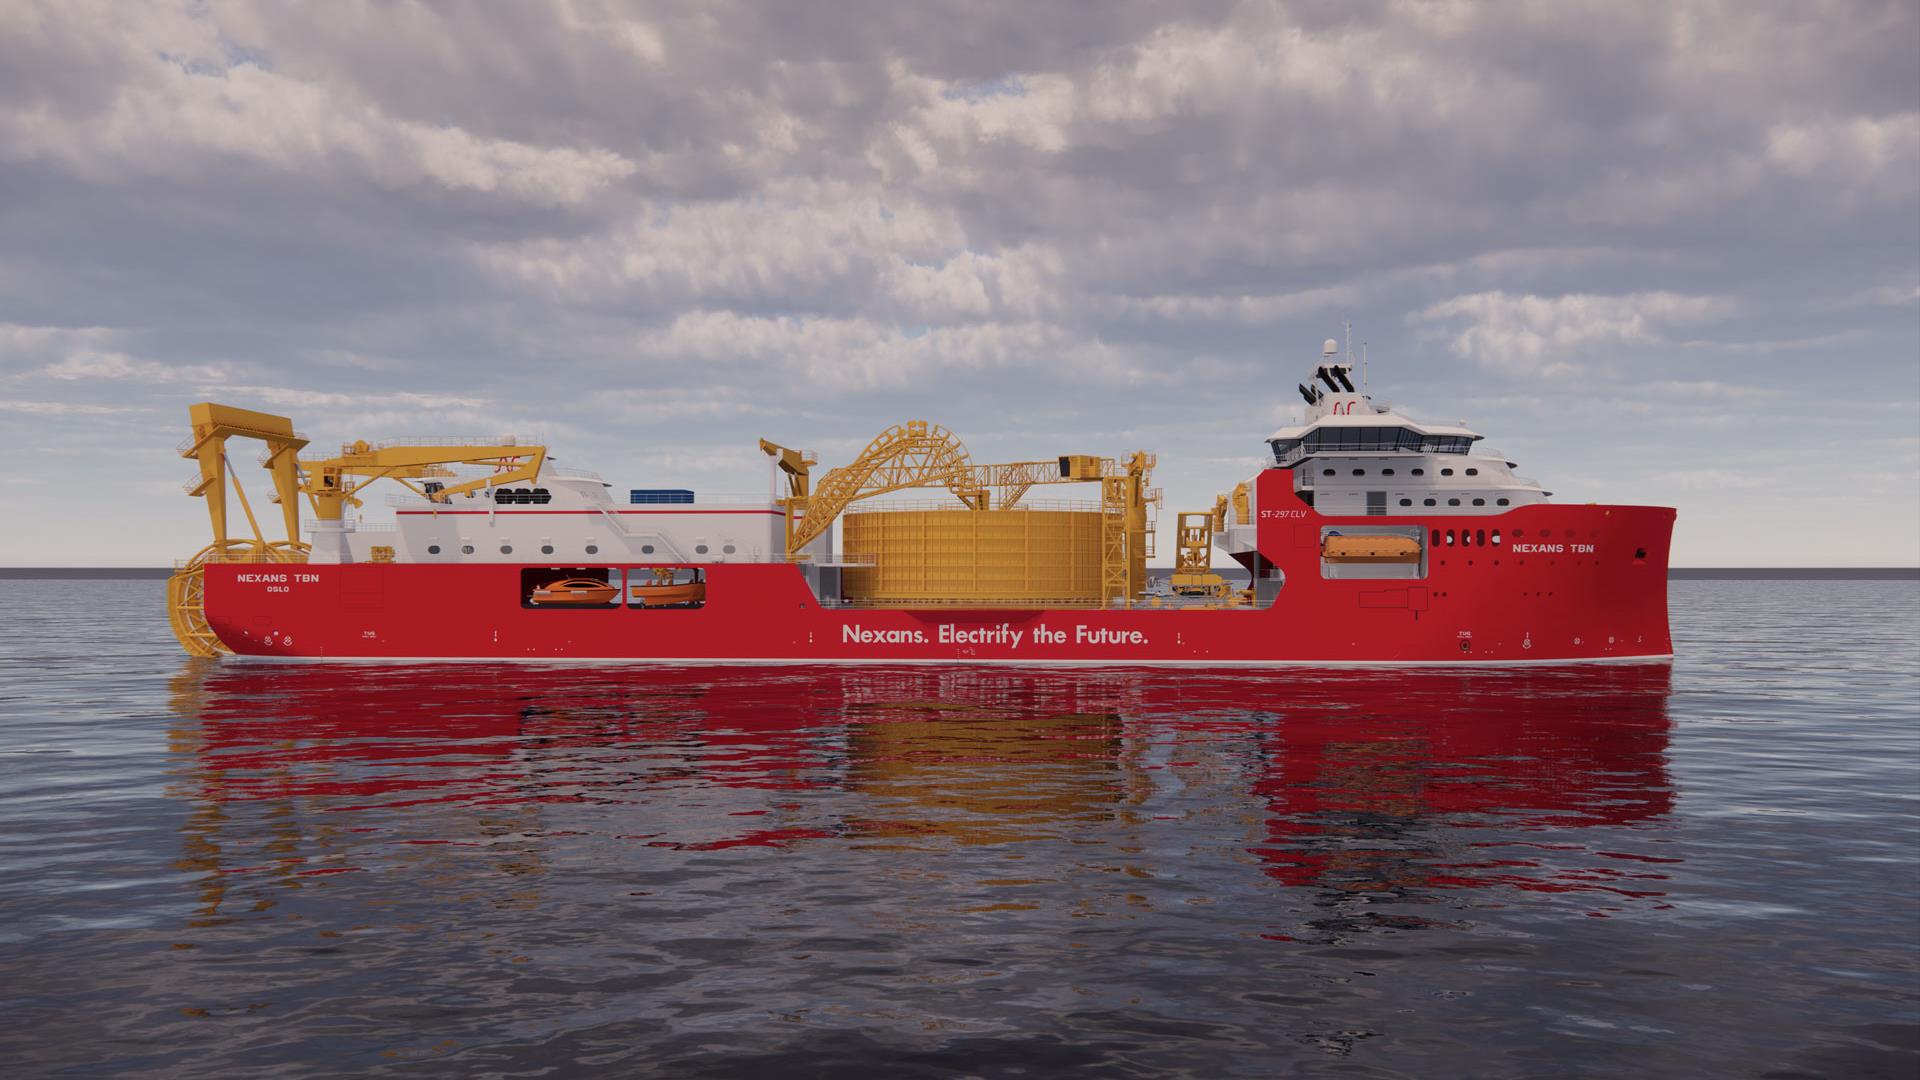 Cable-lay equipment ordered for new Nexans vessel